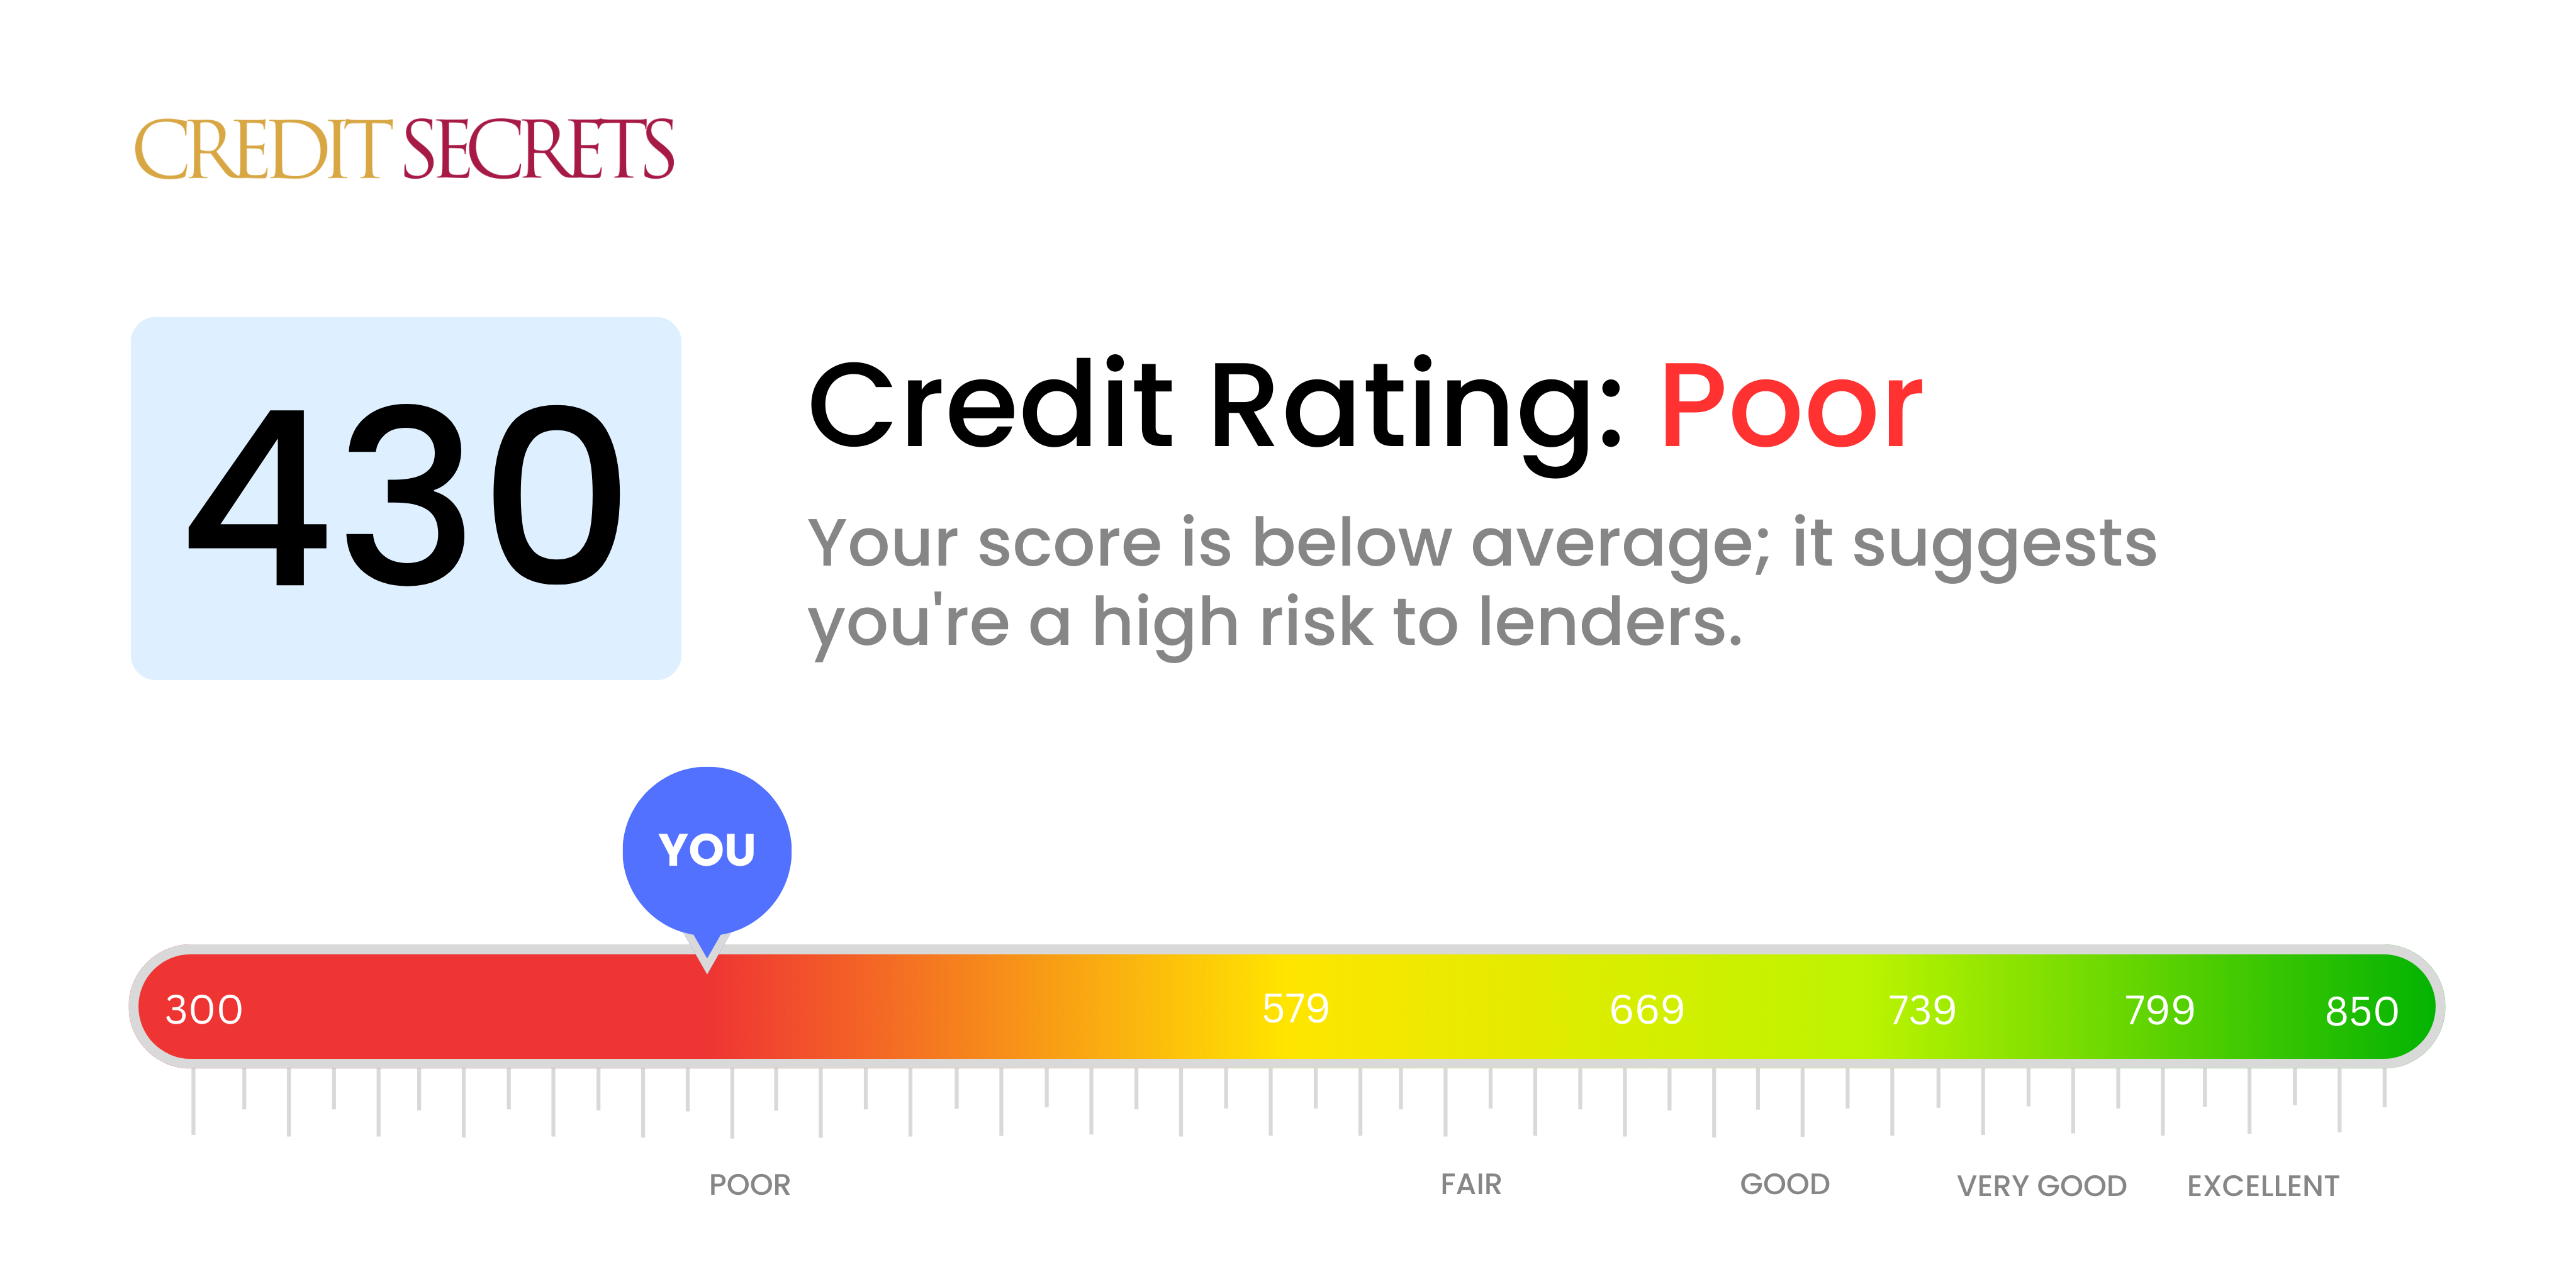 Is 430 a good credit score?